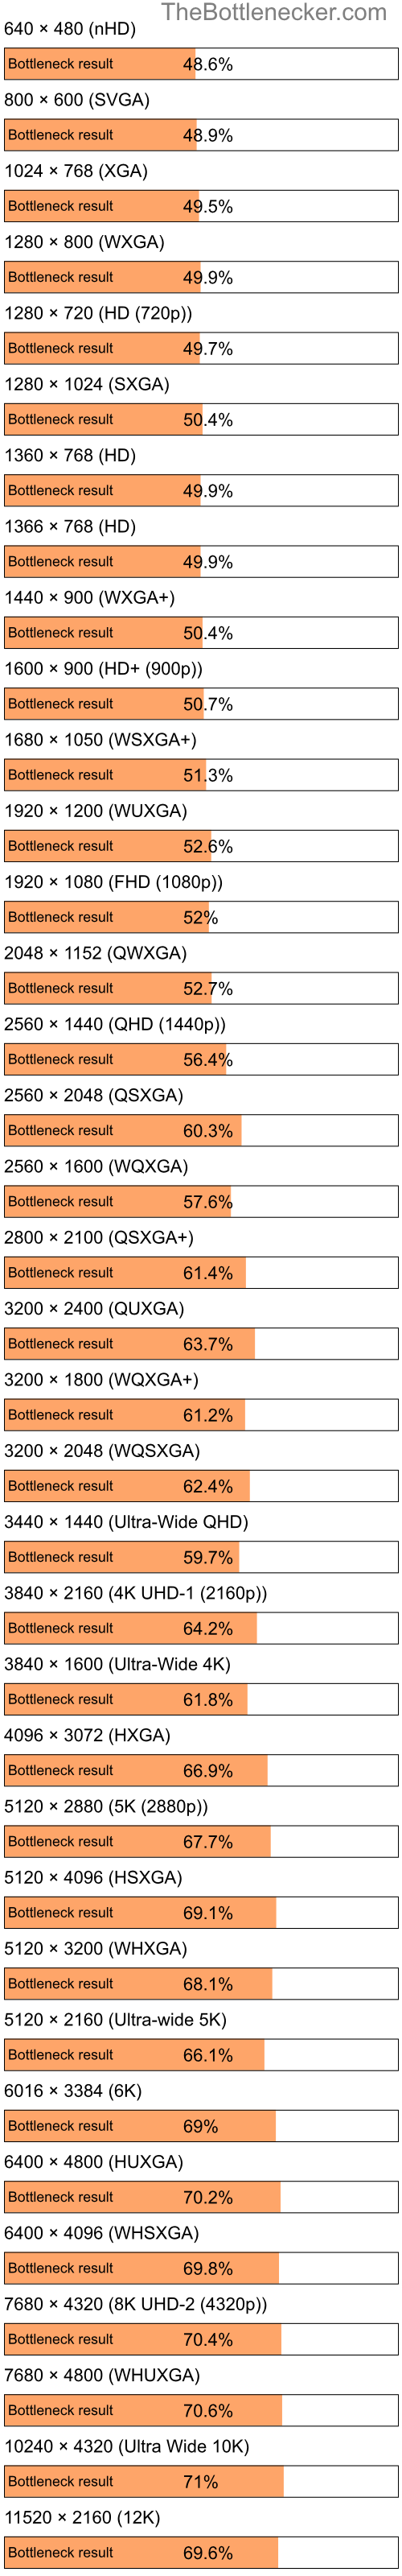 Bottleneck results by resolution for Intel Pentium 4 and AMD Radeon HD 7290 in Processor Intense Tasks